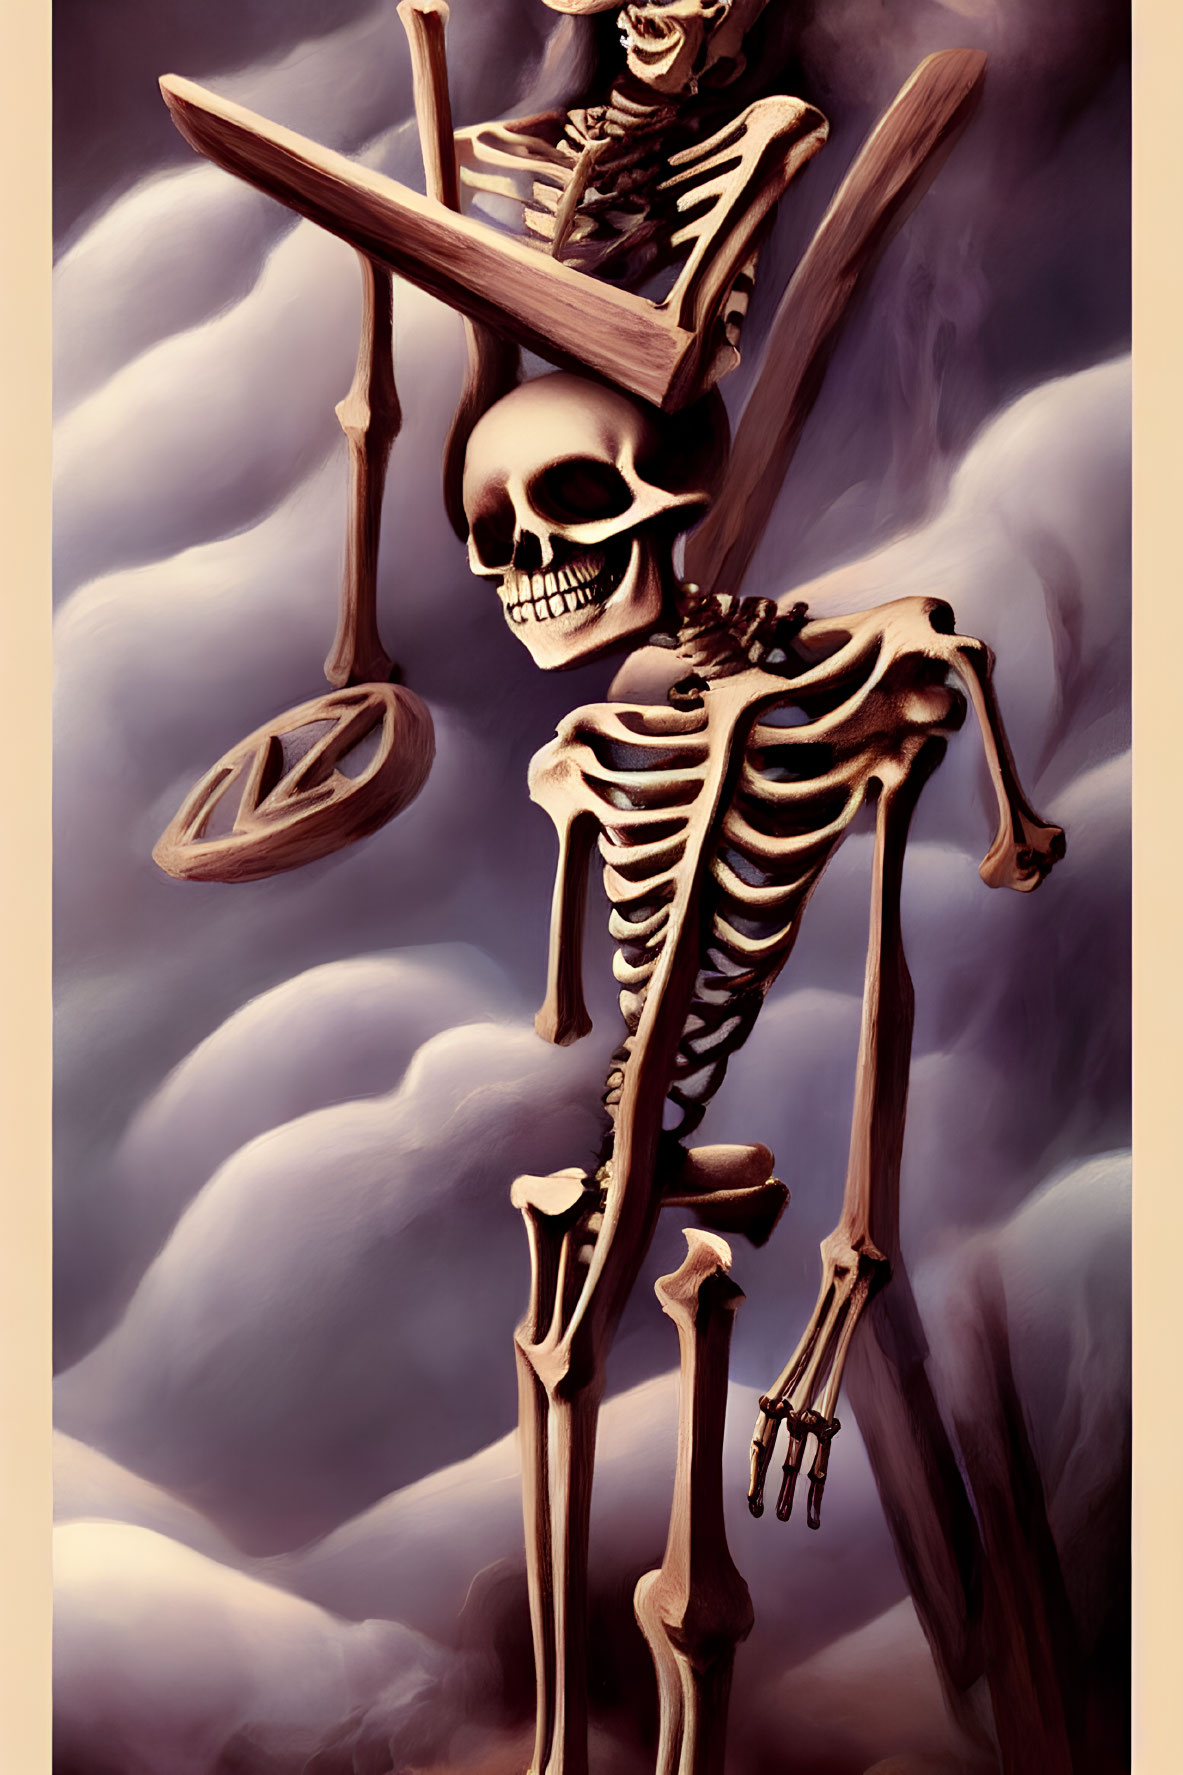 Stylized skeleton with sword and shield on clouds in dramatic lighting